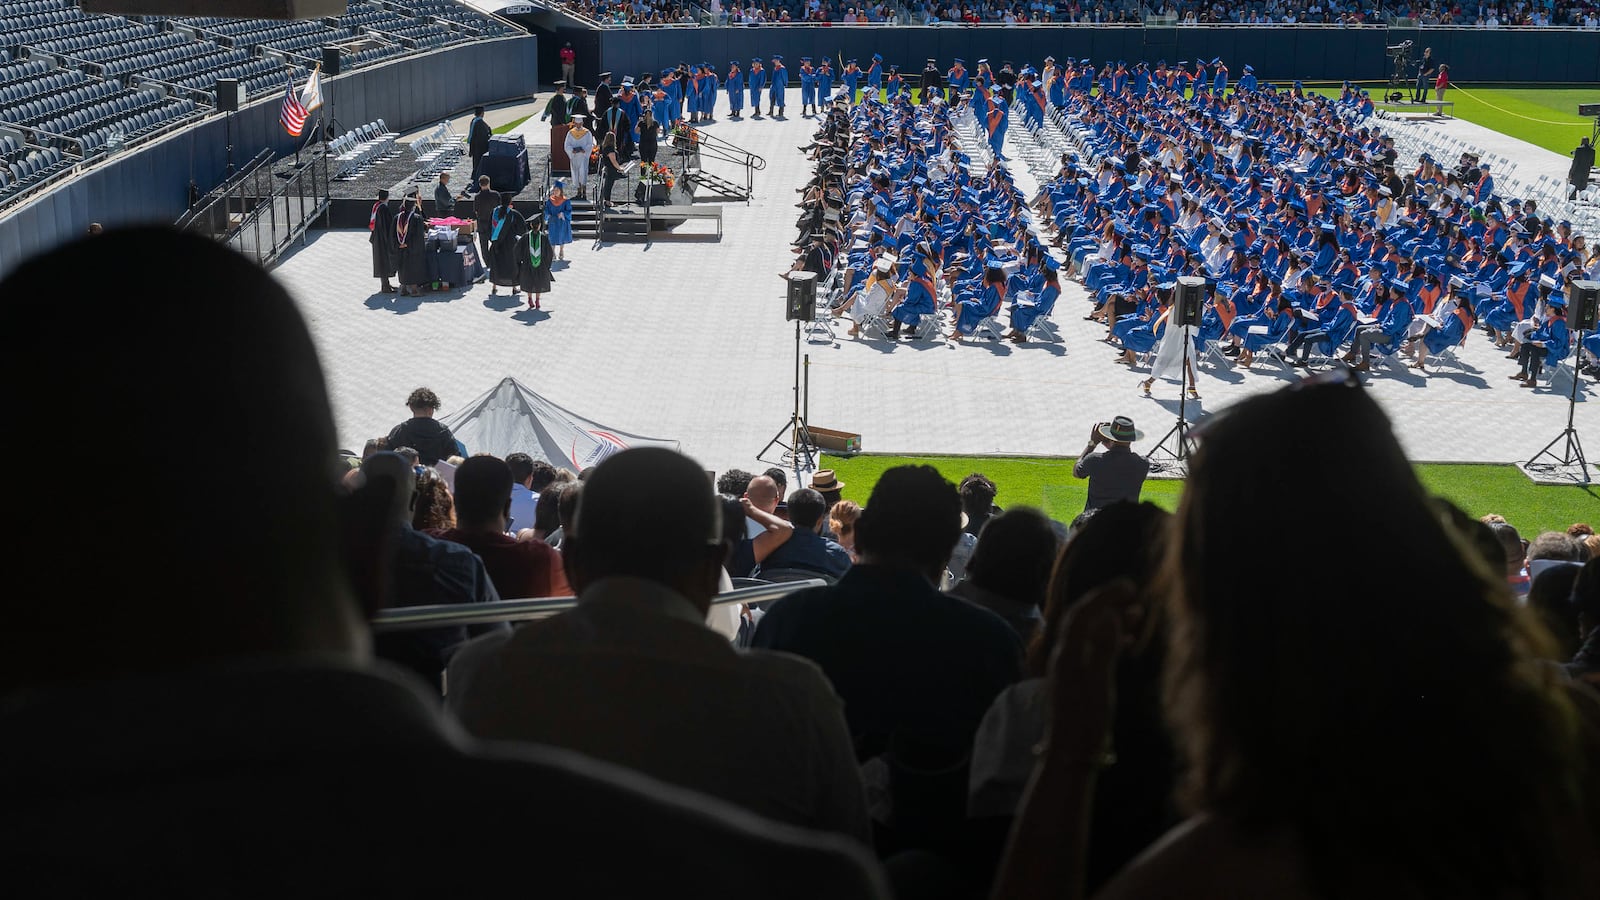 A crowd of people watch from stadium seats as their loved ones begin to walk to the stage for their diplomas.